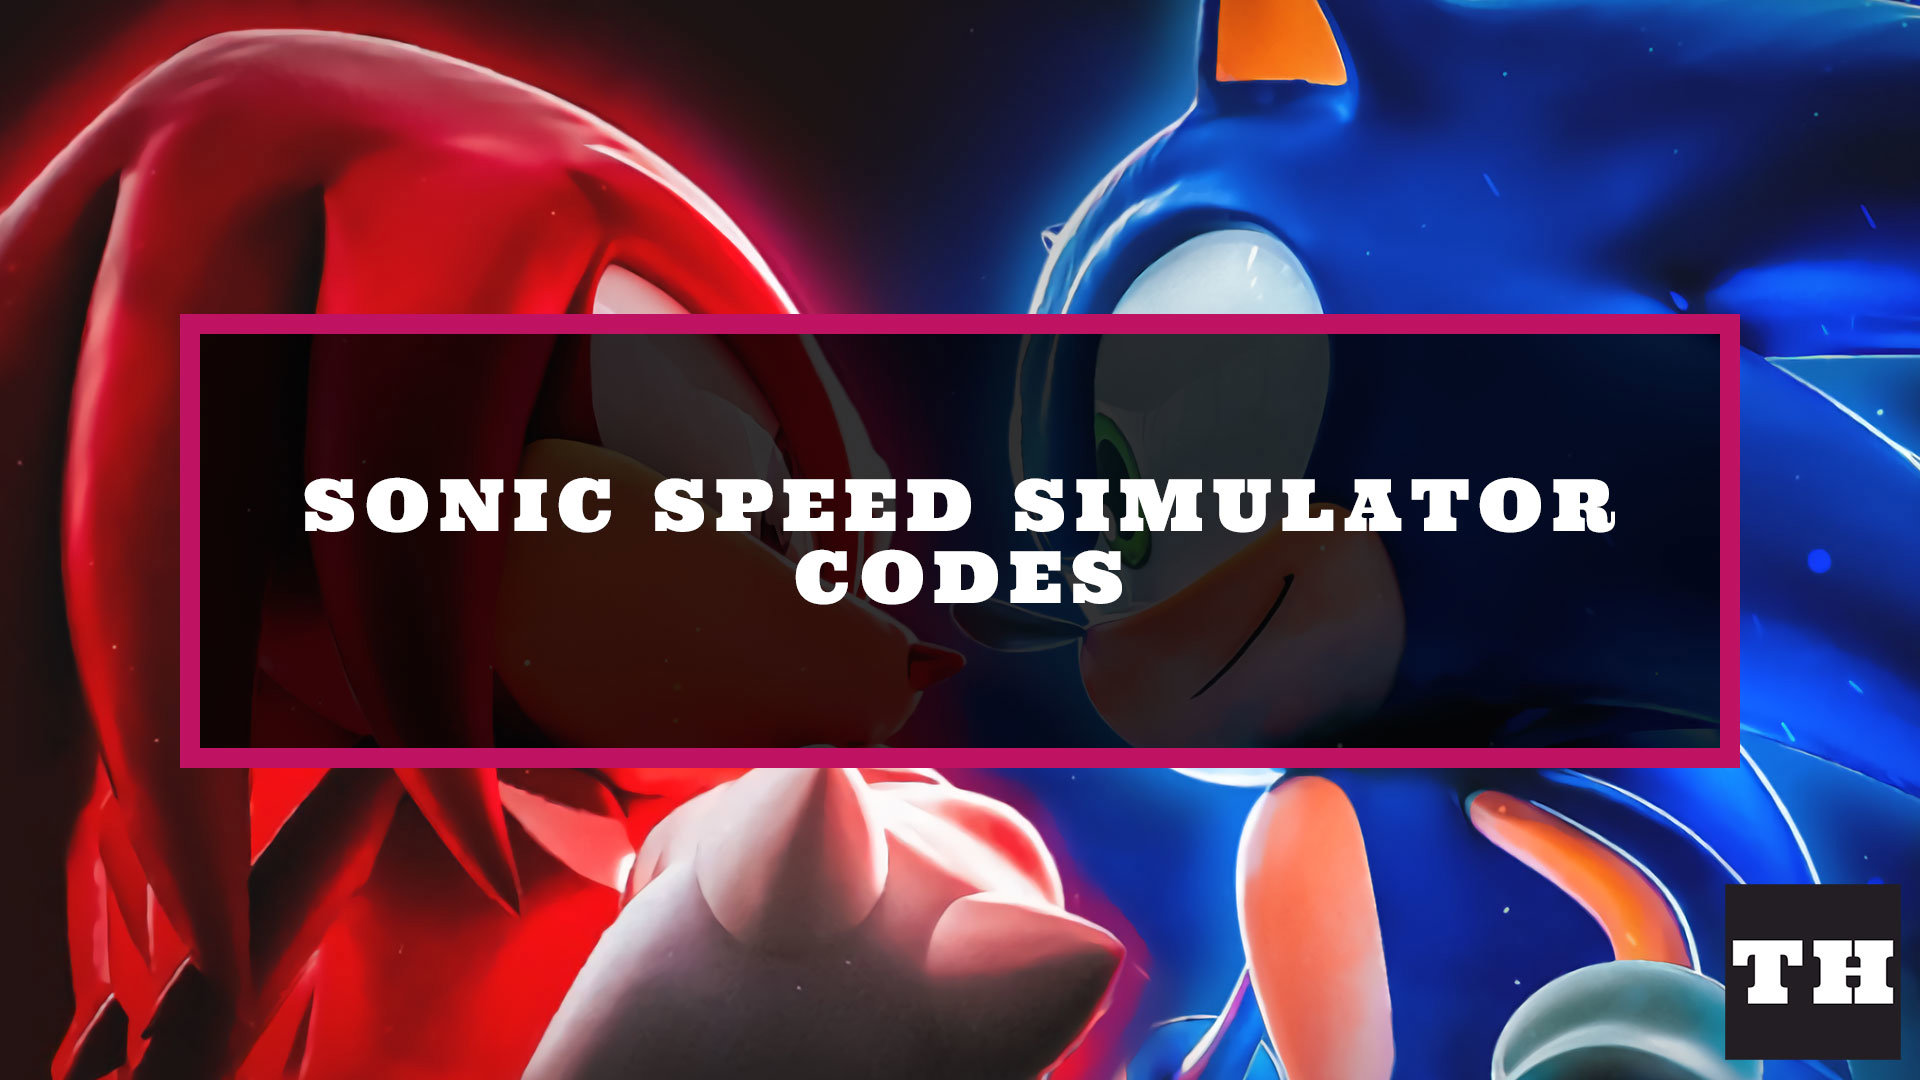 all-new-secret-chrome-metal-sonic-codes-in-sonic-speed-simulator-codes-roblox-sonic-speed